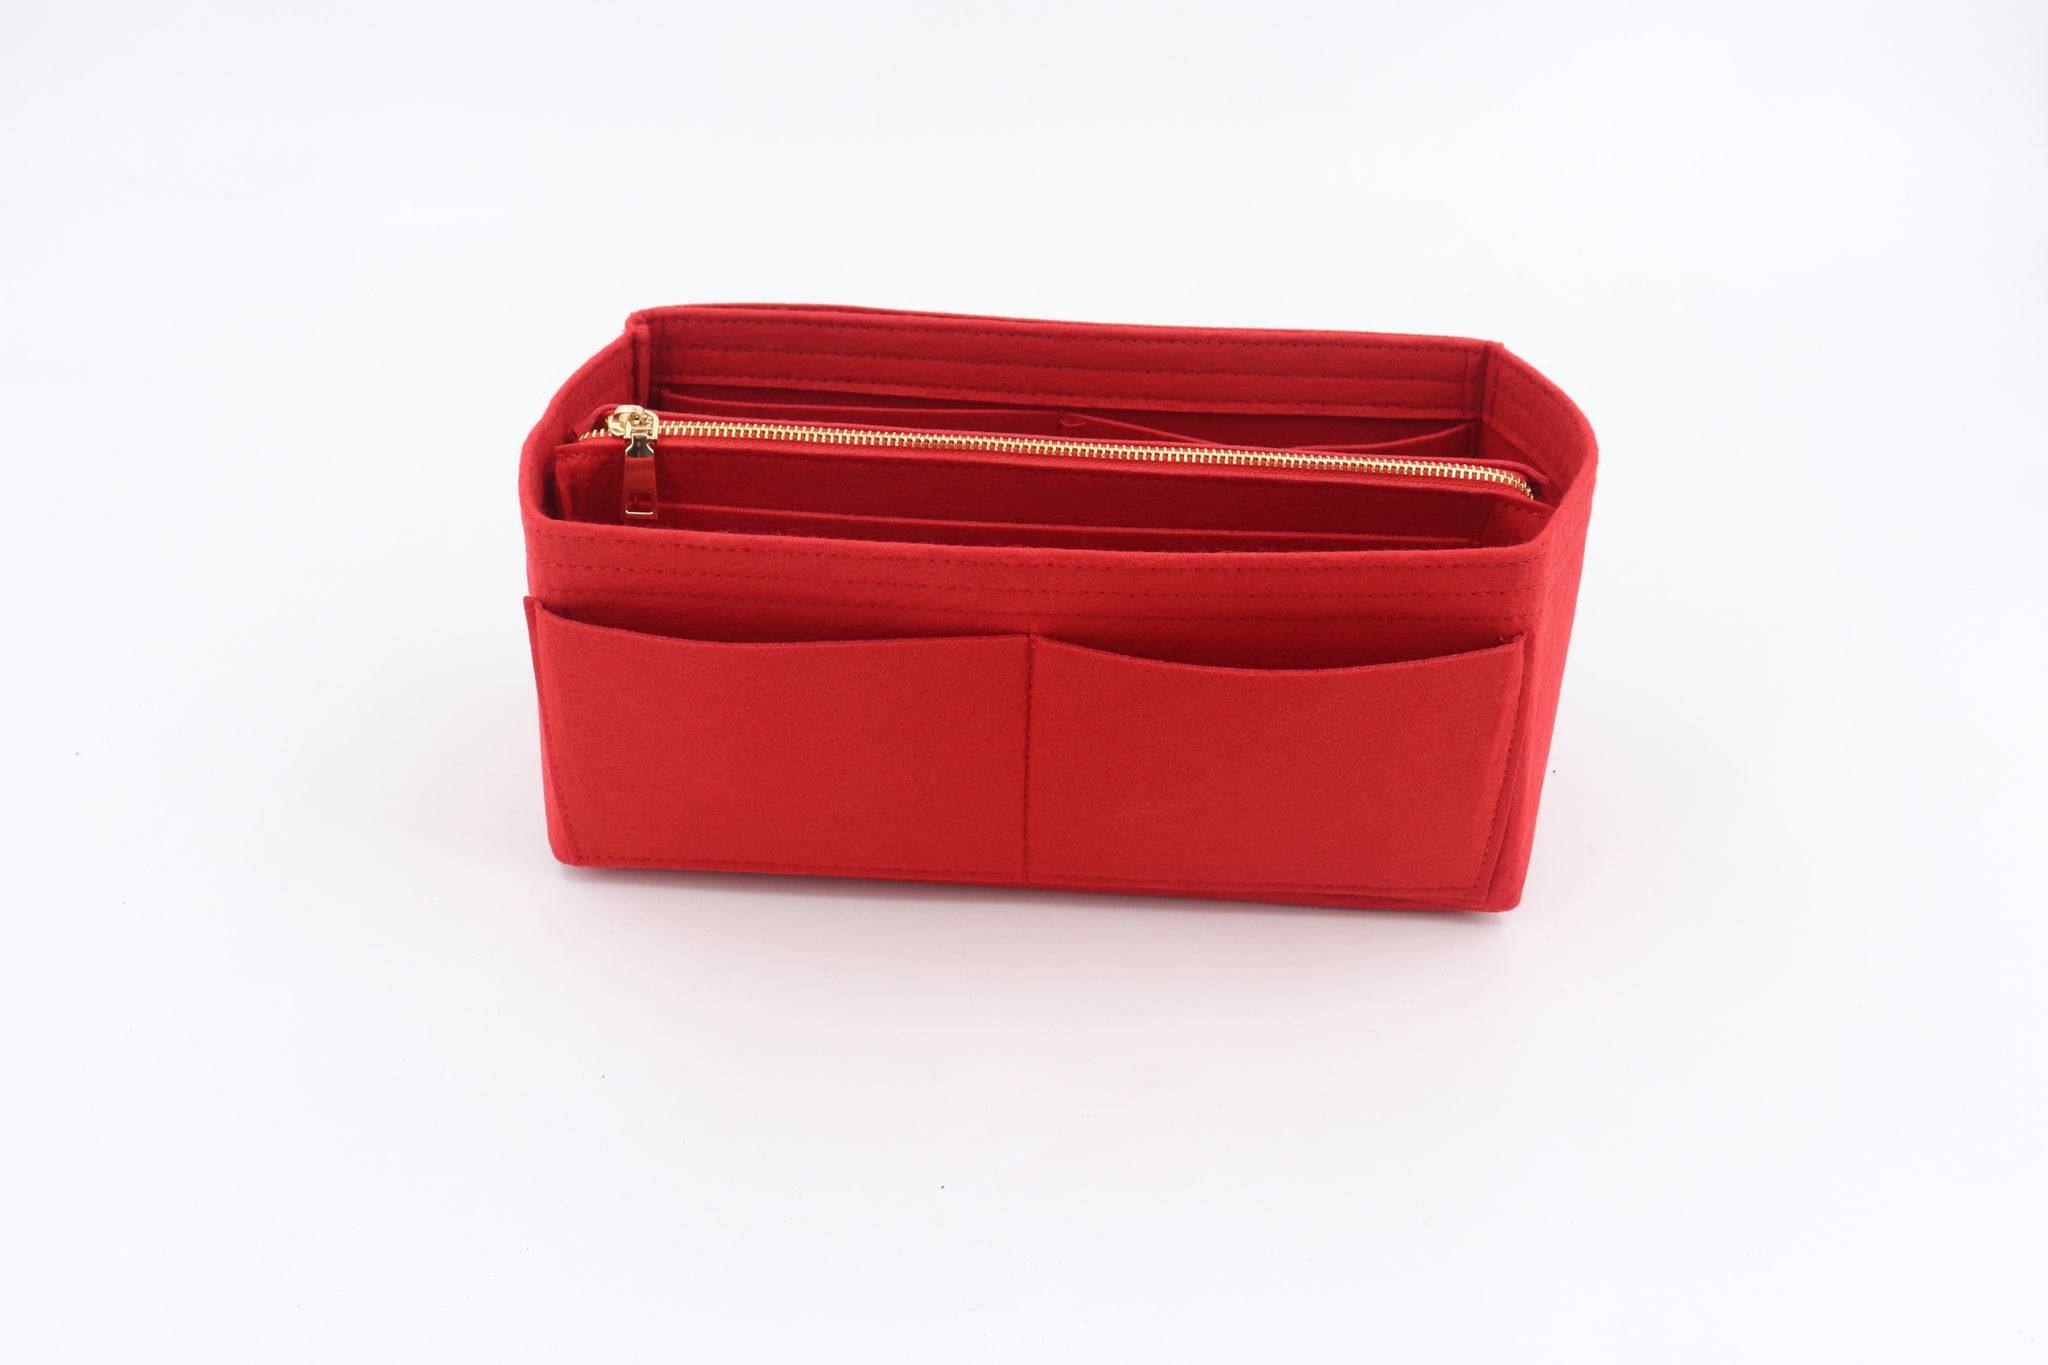 Graceful PM / MM Suedette Singular Style Leather Handbag Organizer  (Fuchsia) (More Colors Available)